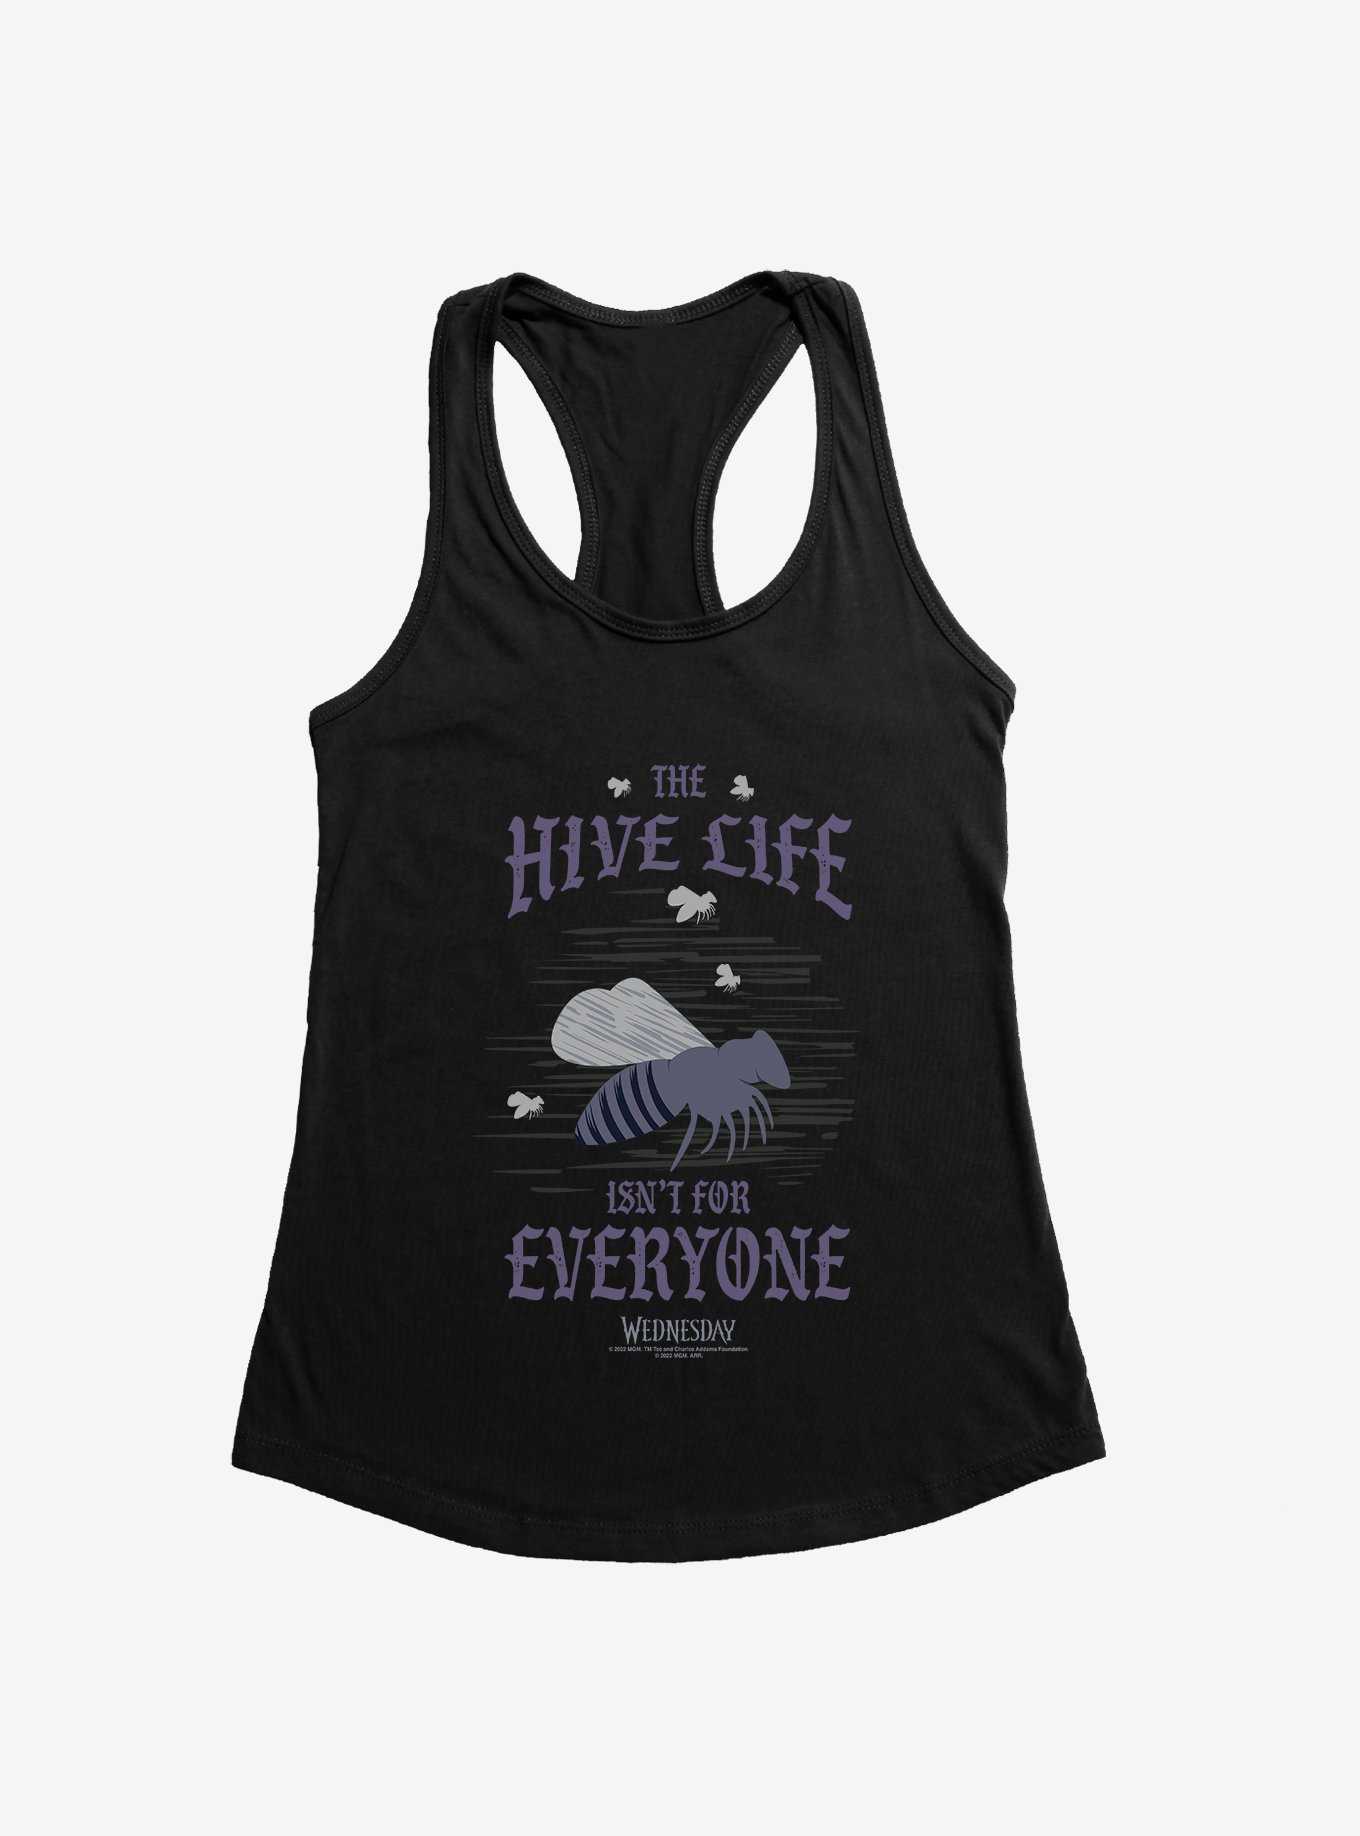 Wednesday The Hive Life Isn't For Everyone Girls Tank, , hi-res